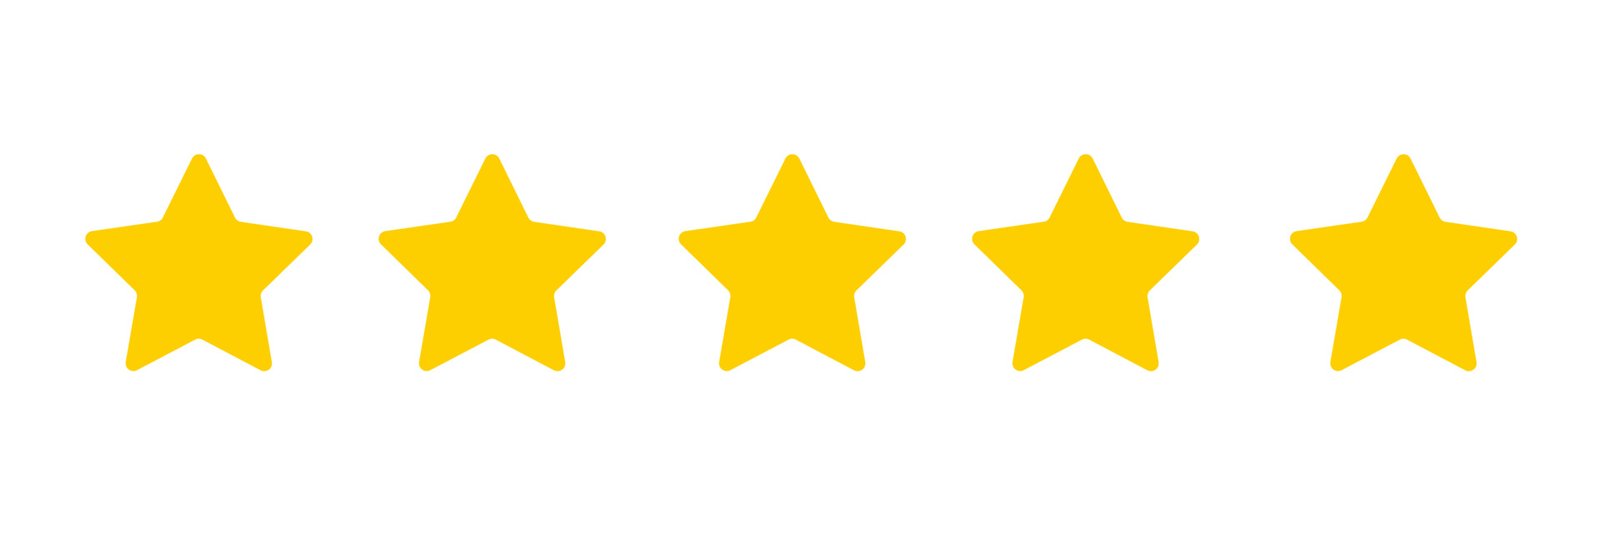 vecteezy_five-star-customer-product-ratings-review-flat-icons-for_4256658